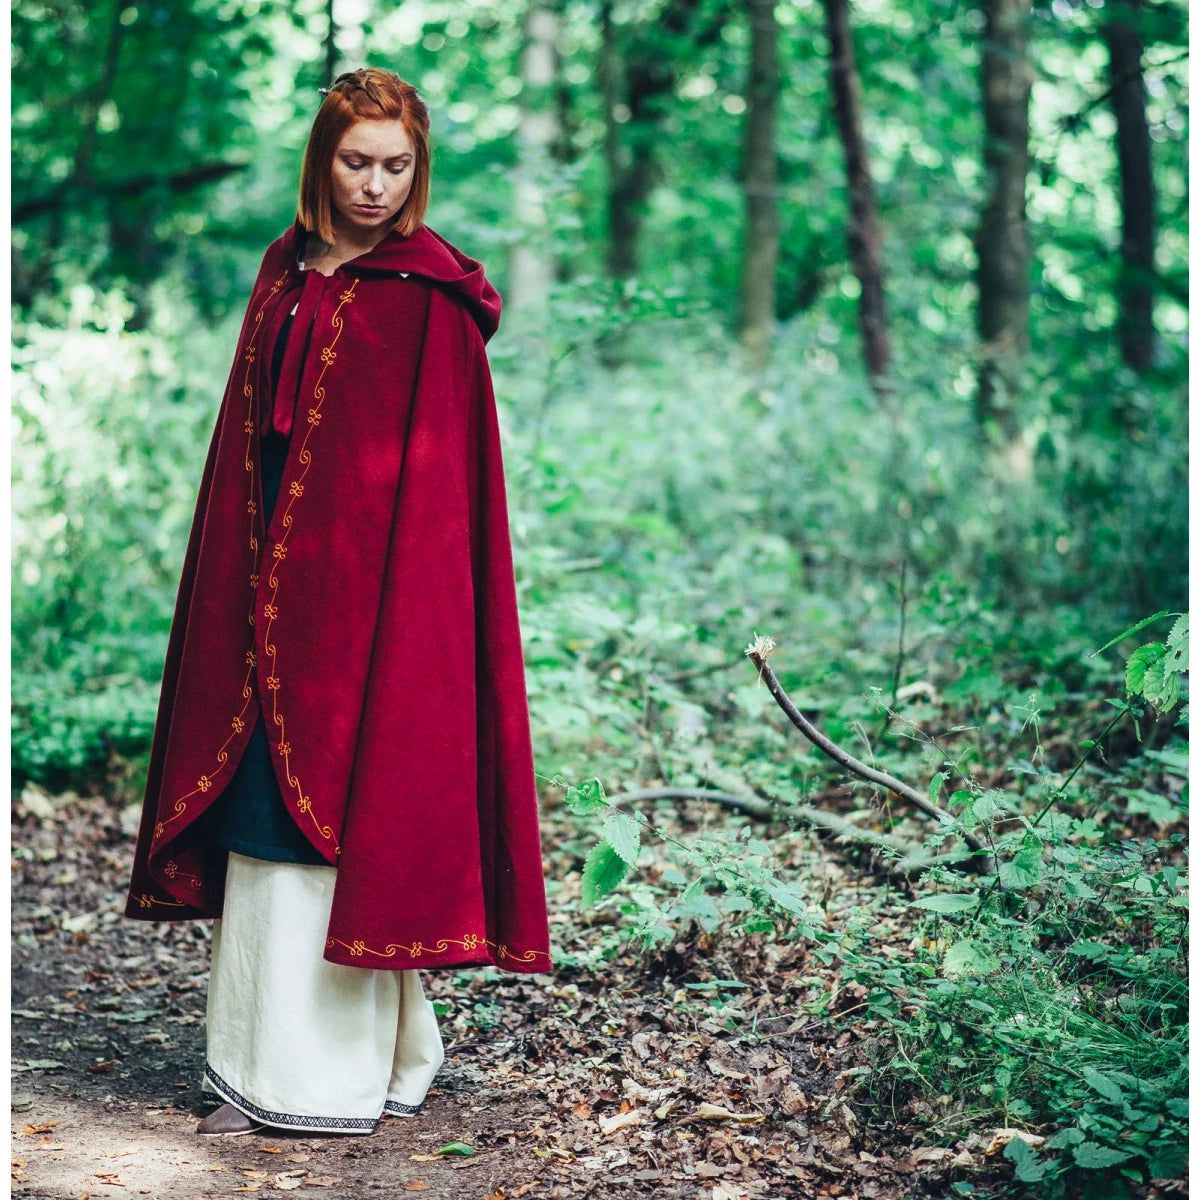 Blue Hooded Renaissance Cloak | Exquisite Hand Embroidery